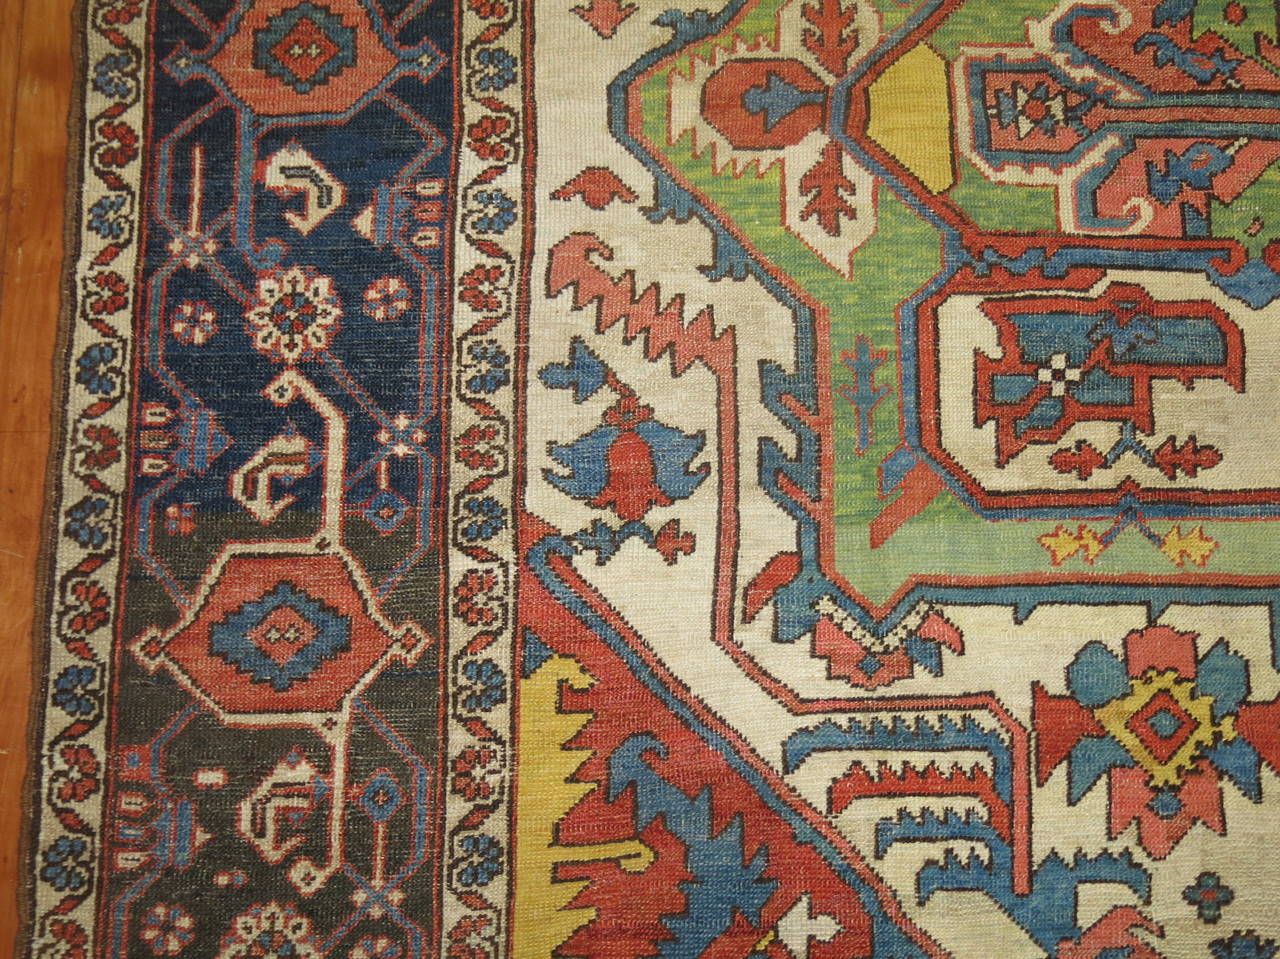 Antique Serapi carpets were woven on the level of a family or small workshop with multiple weavers working several years to complete each Persian rug. The weaving was done almost exclusively by women. Highly skilled artisans, they continually